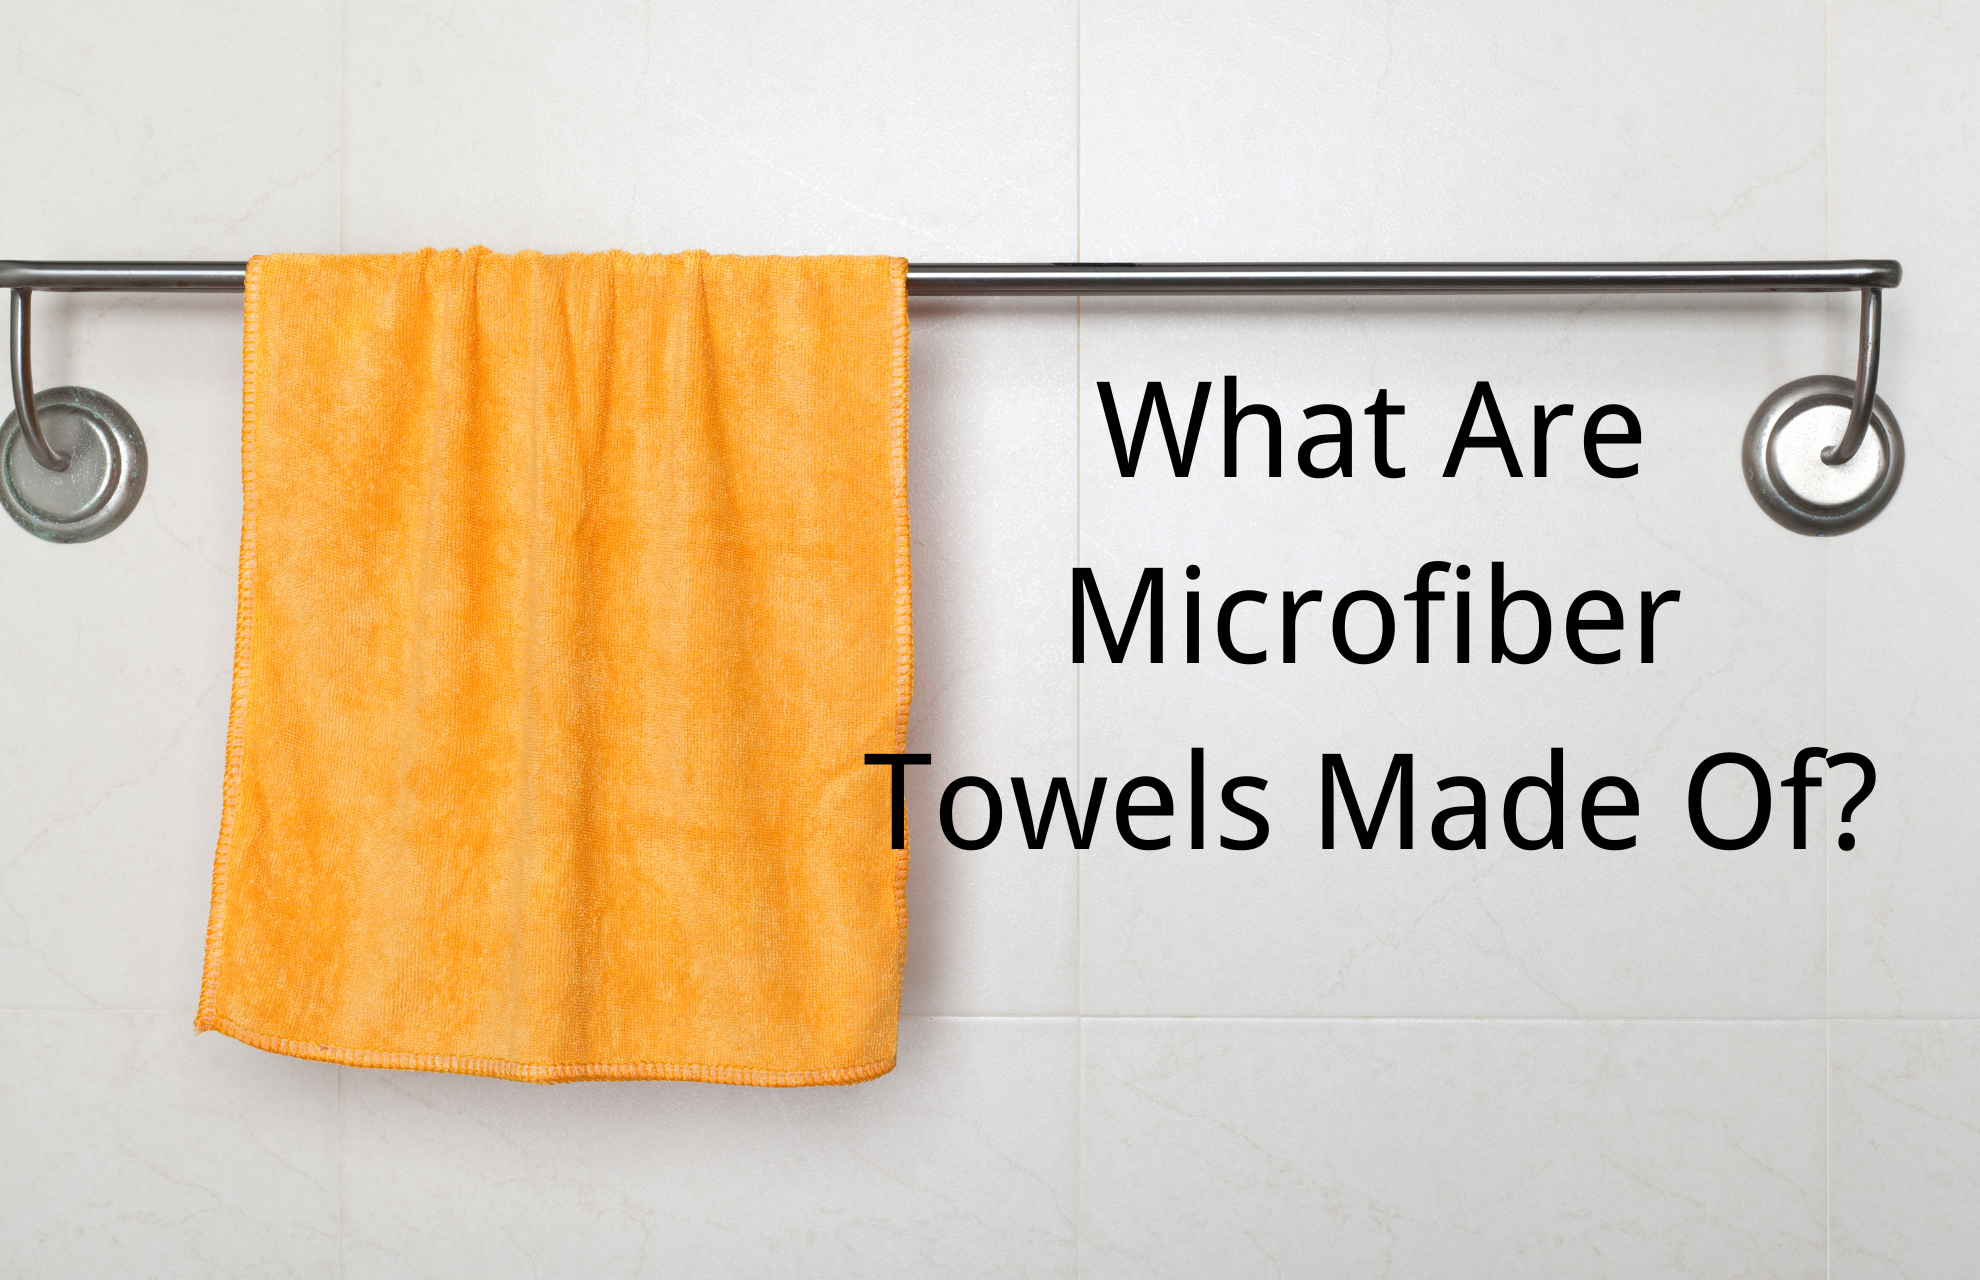 What Are Microfiber Towels Made Of?